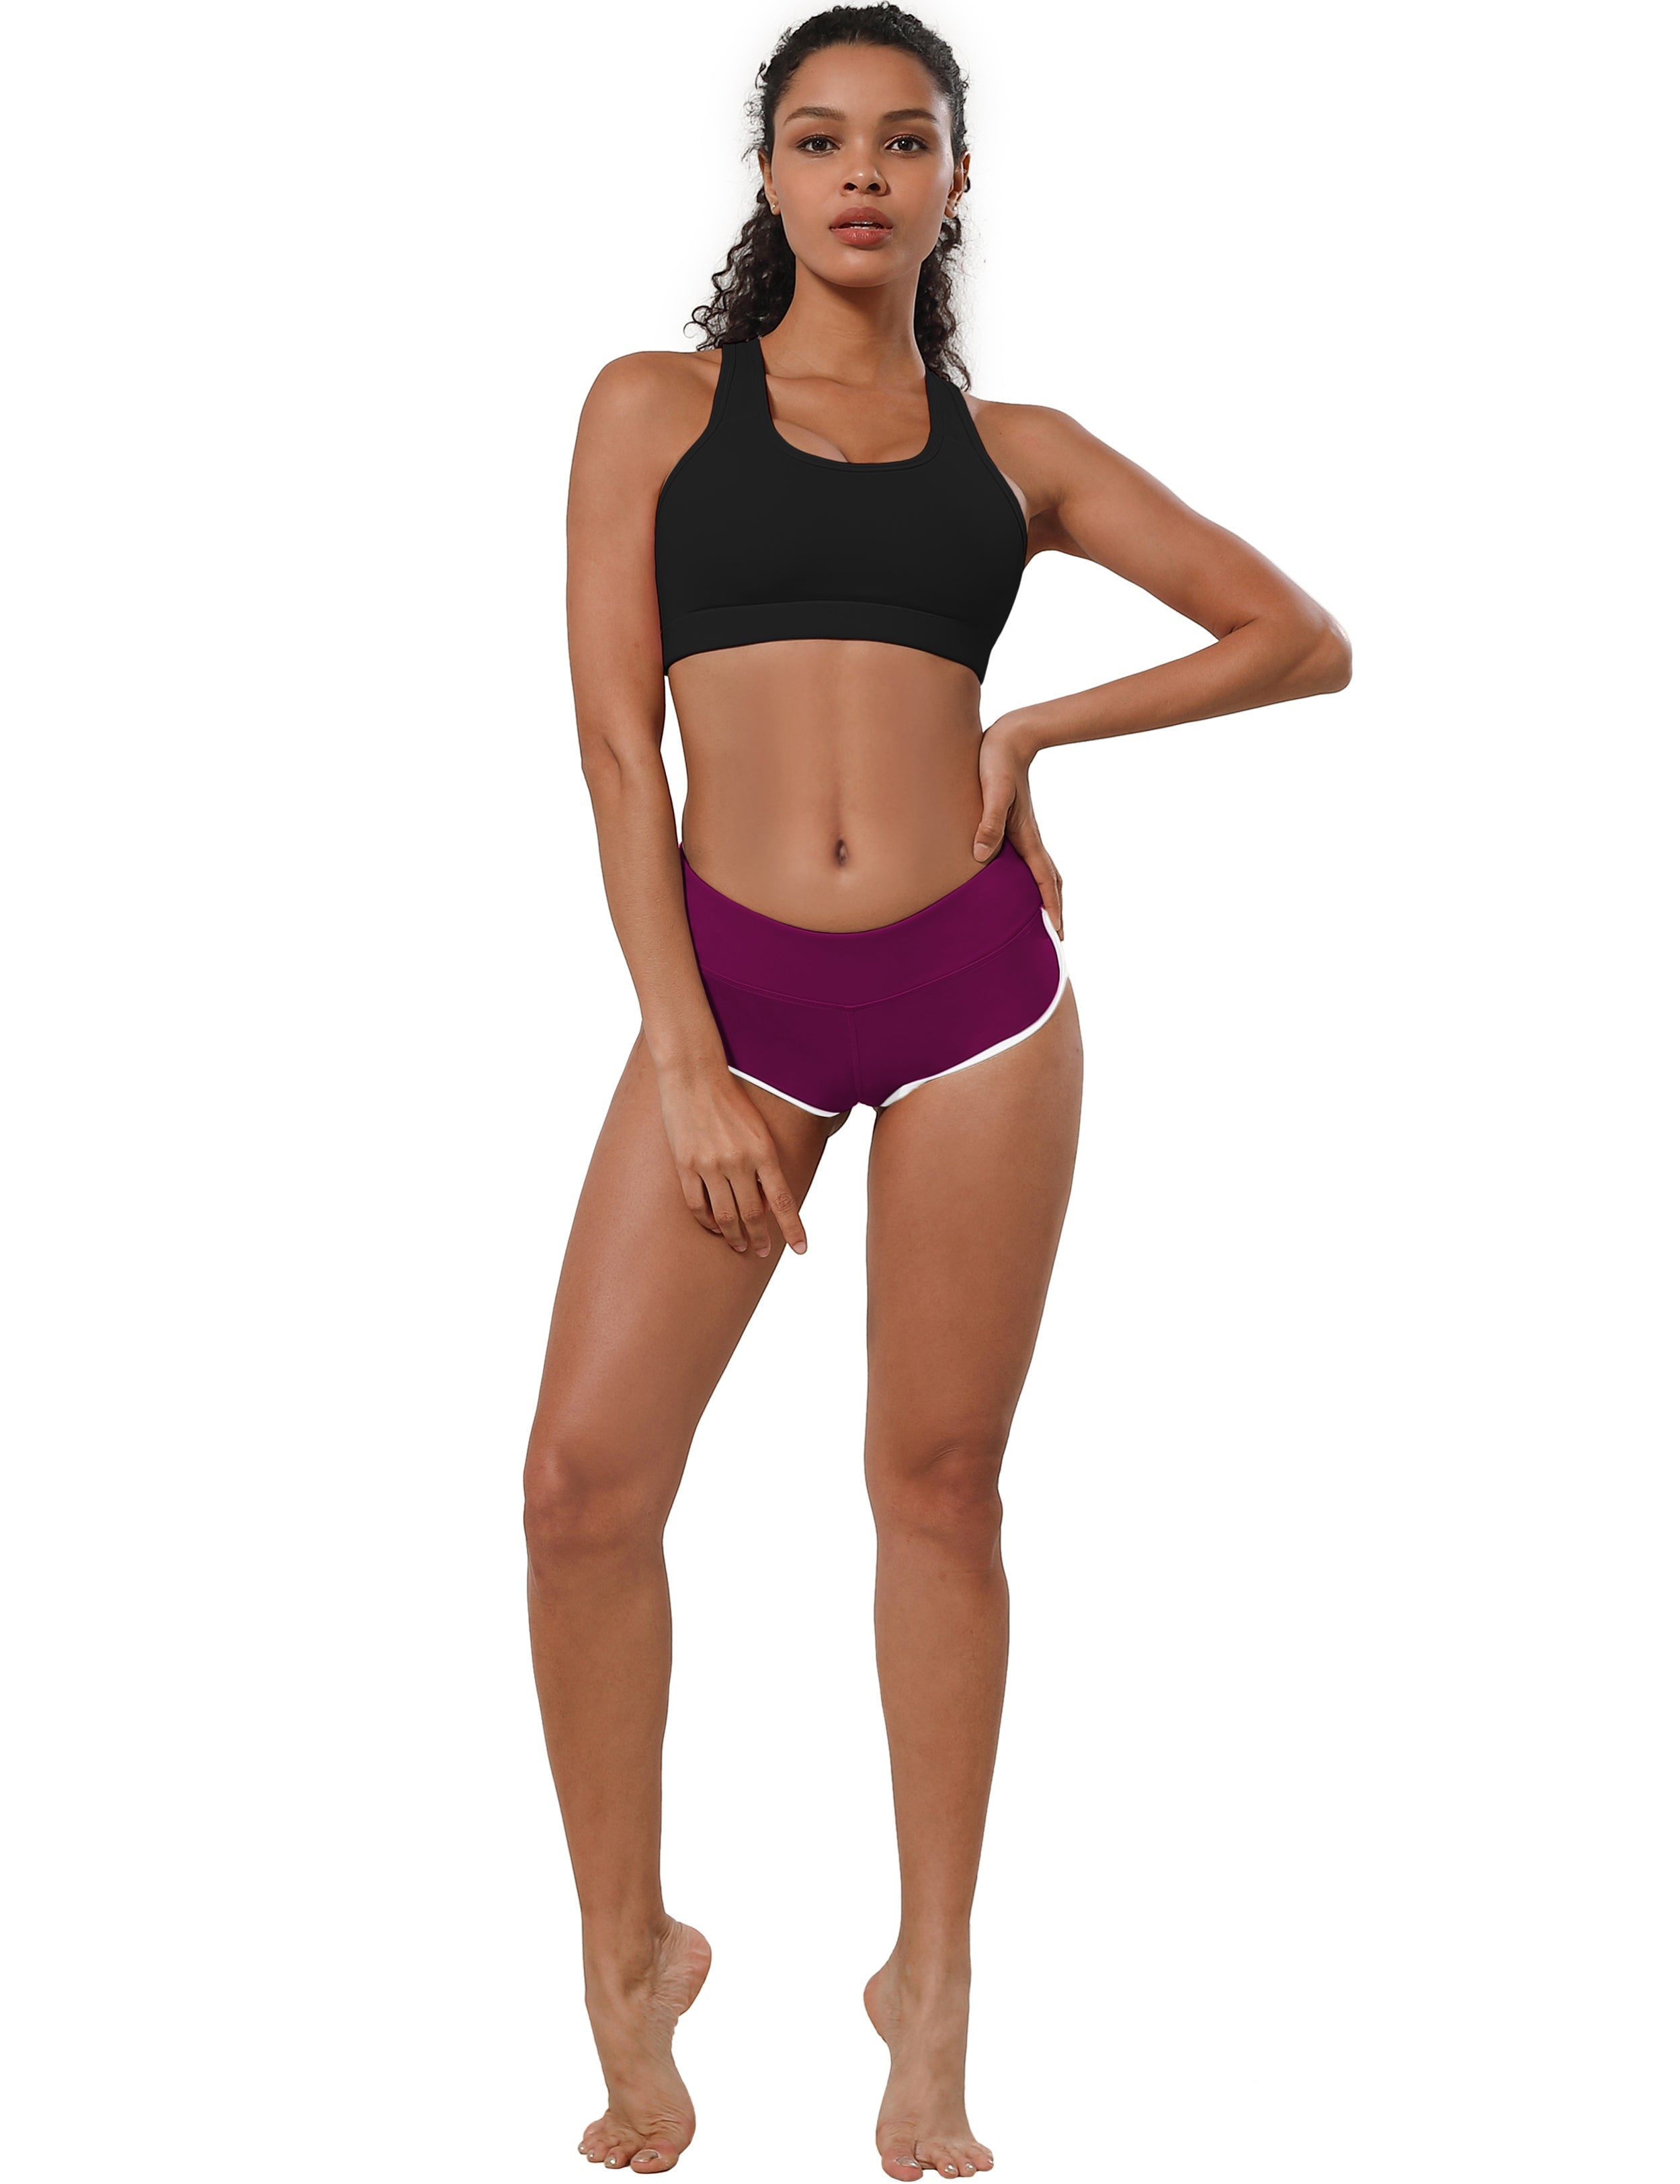 Sexy Booty Golf Shorts grapevine Sleek, soft, smooth and totally comfortable: our newest sexy style is here. Softest-ever fabric High elasticity High density 4-way stretch Fabric doesn't attract lint easily No see-through Moisture-wicking Machine wash 75%Nylon/25%Spandex